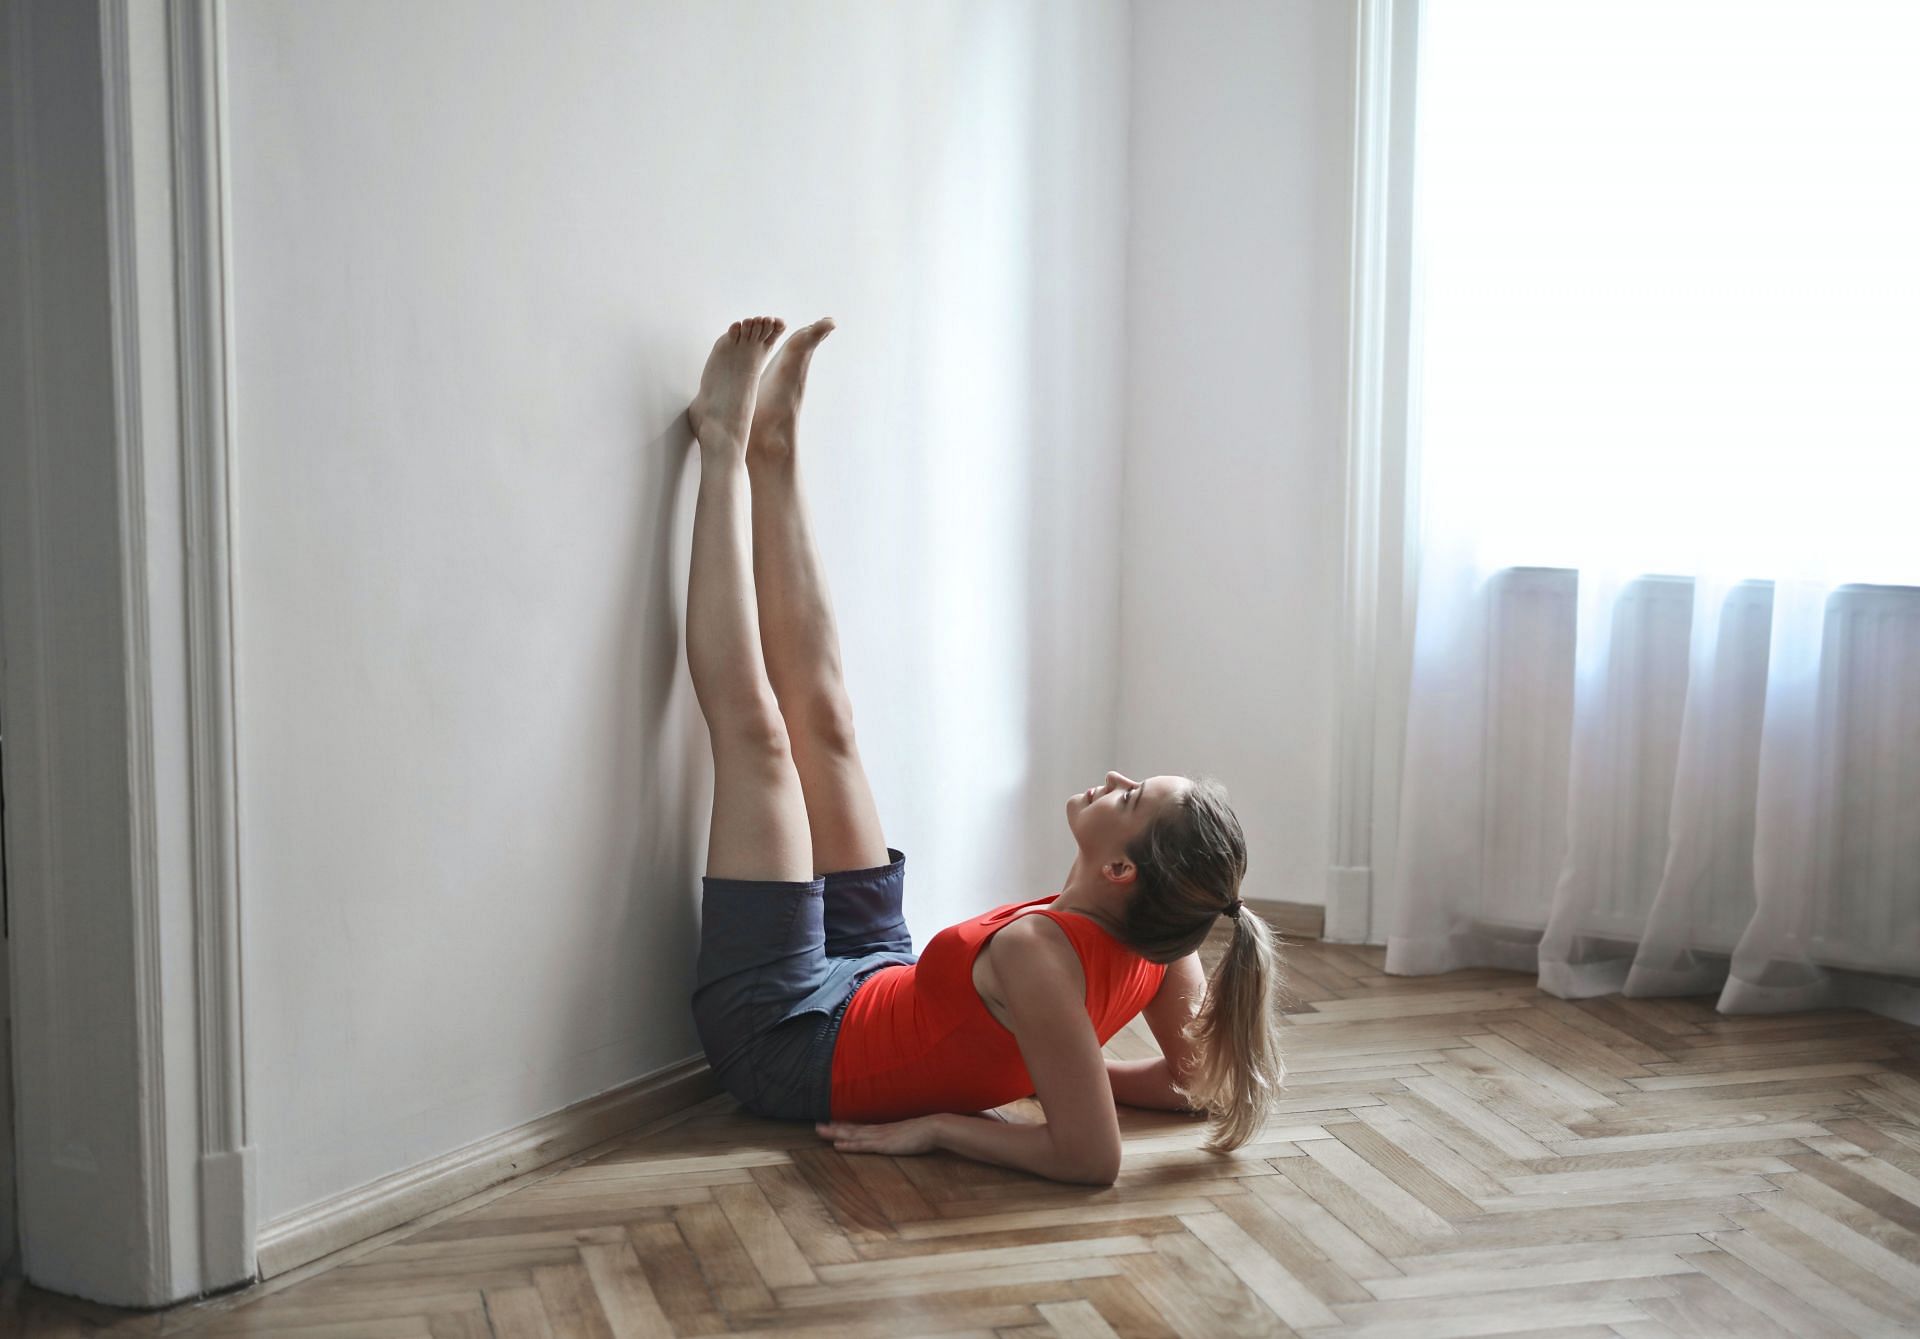 Legs up the wall pose has been recently trending for its benefits. (Image via Pexels/ Andrea Piacquadio)